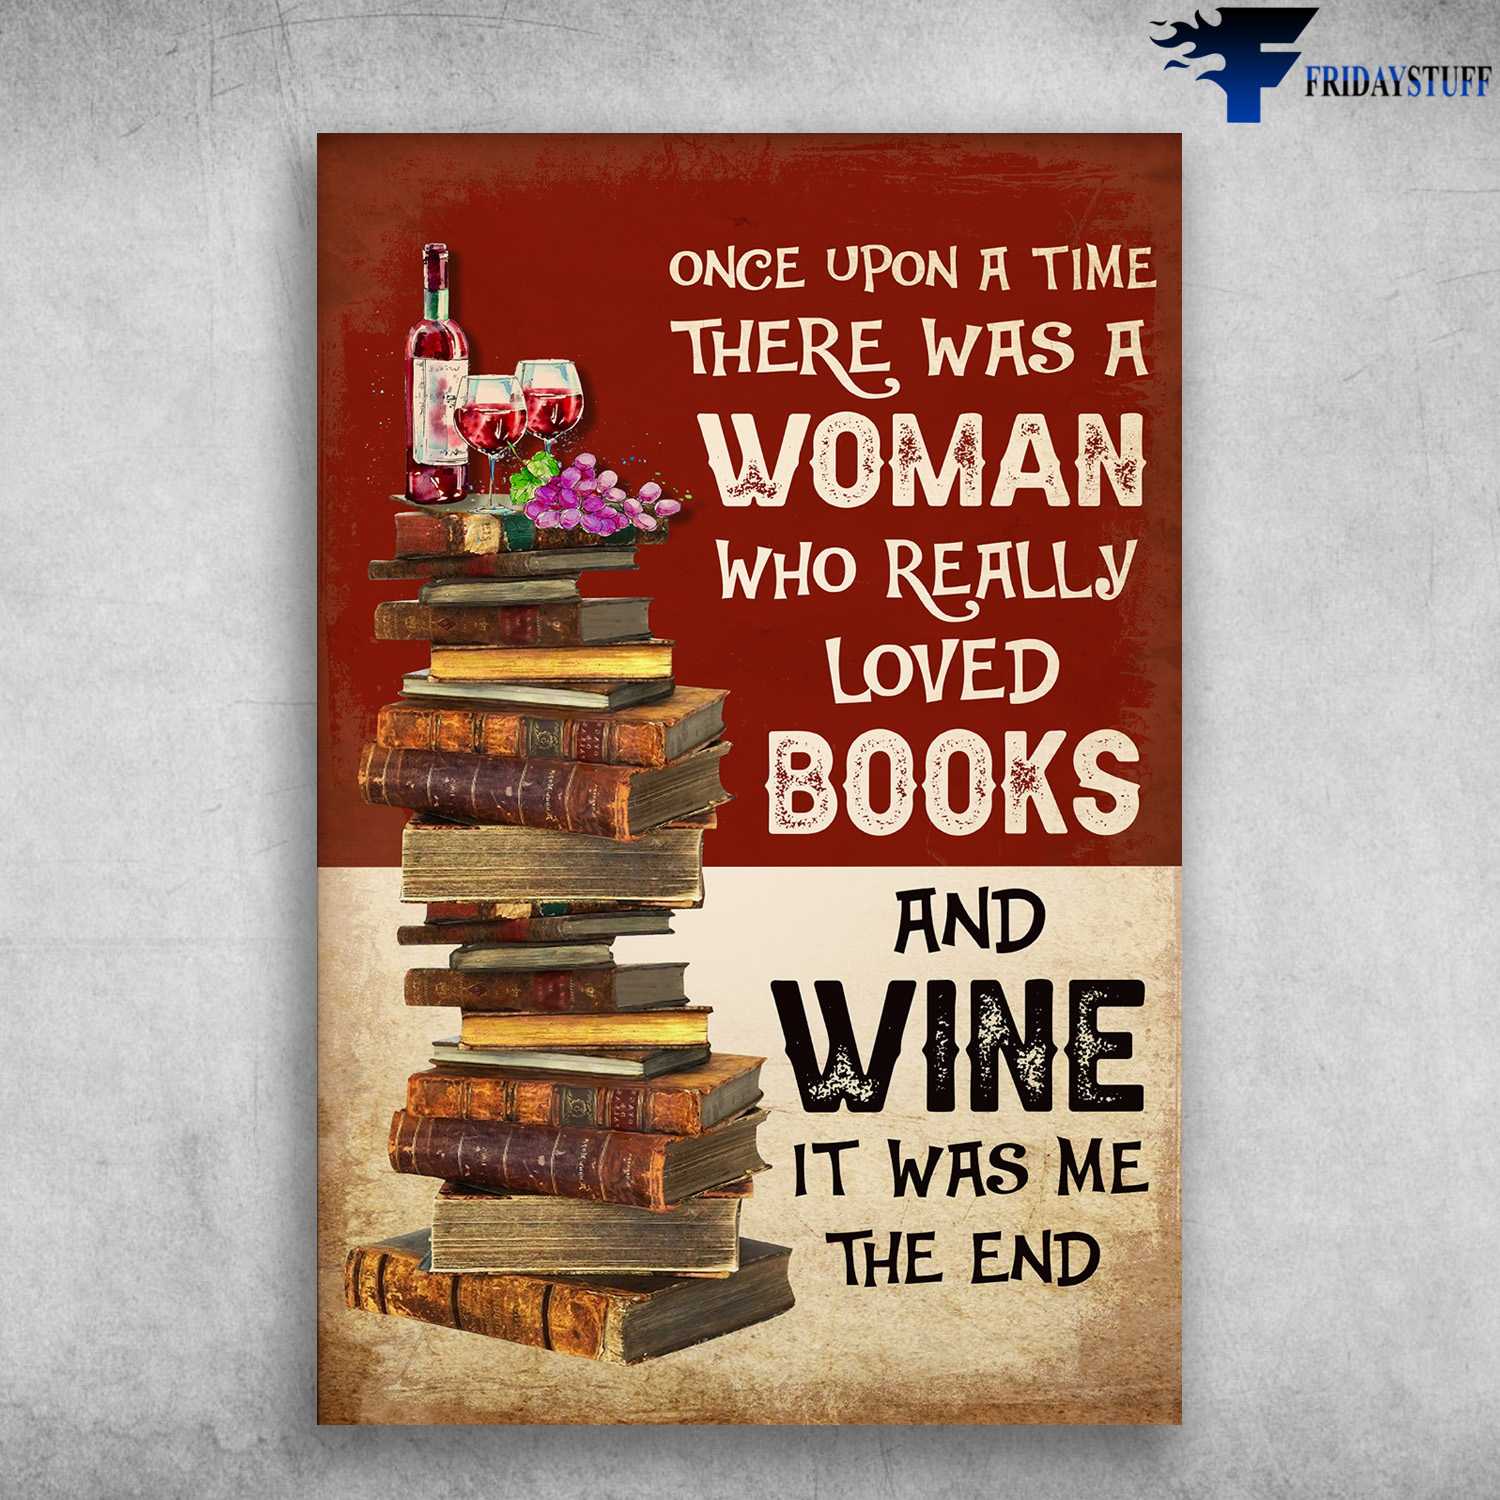 Book Lover, Book And Wine, Once Upon A Time, There Was A Woman, Who Really Loved Books And Wine, It Was Me, The End